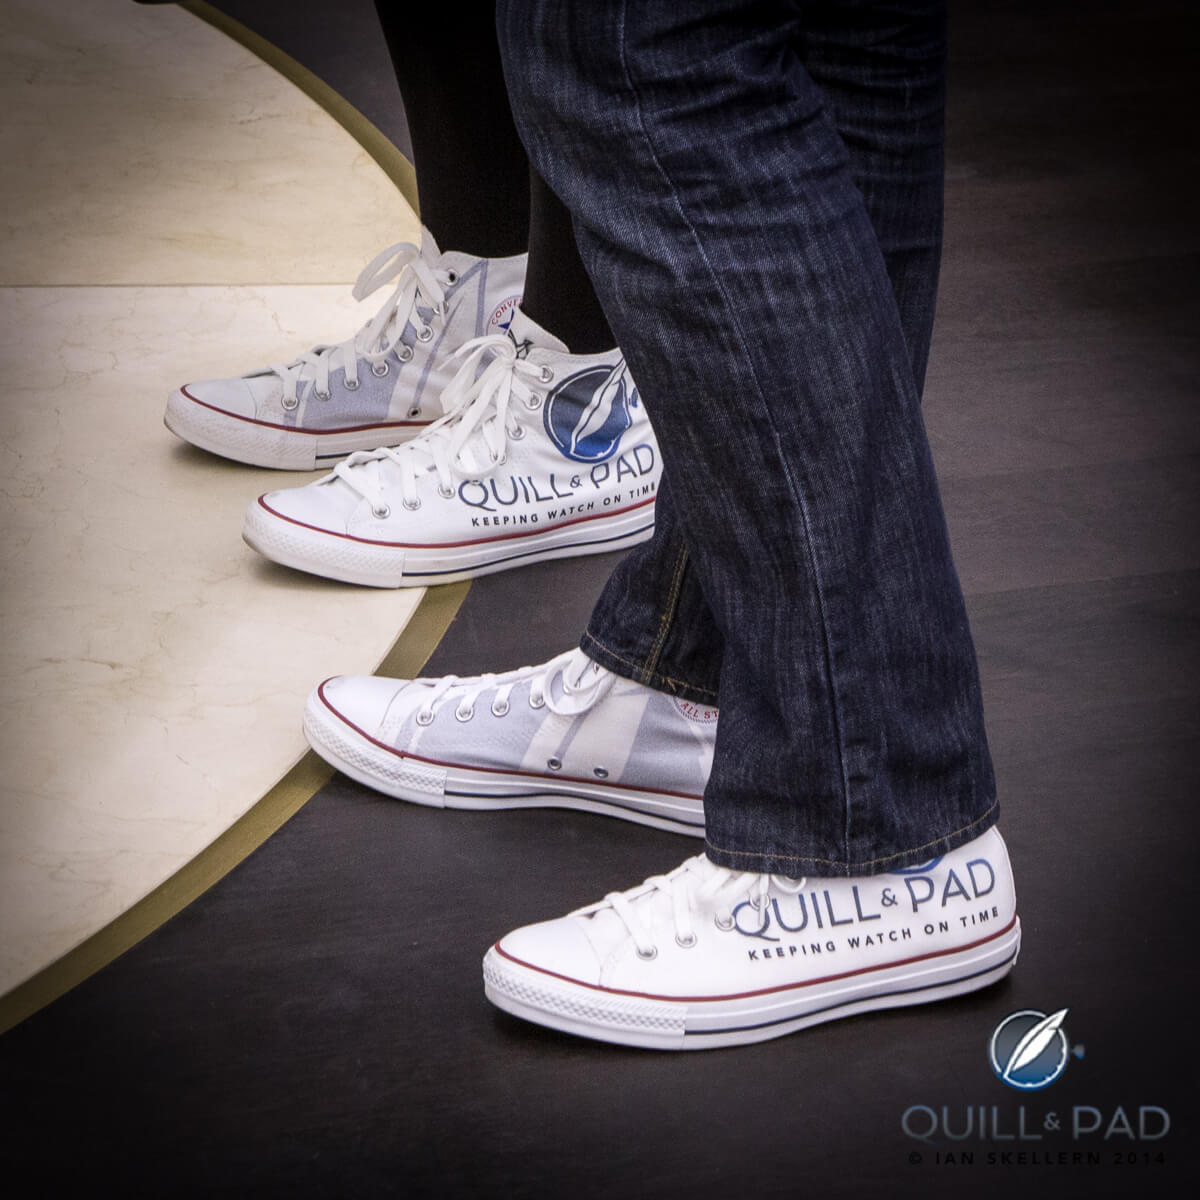 Baselworld is easier in comfortable shoes